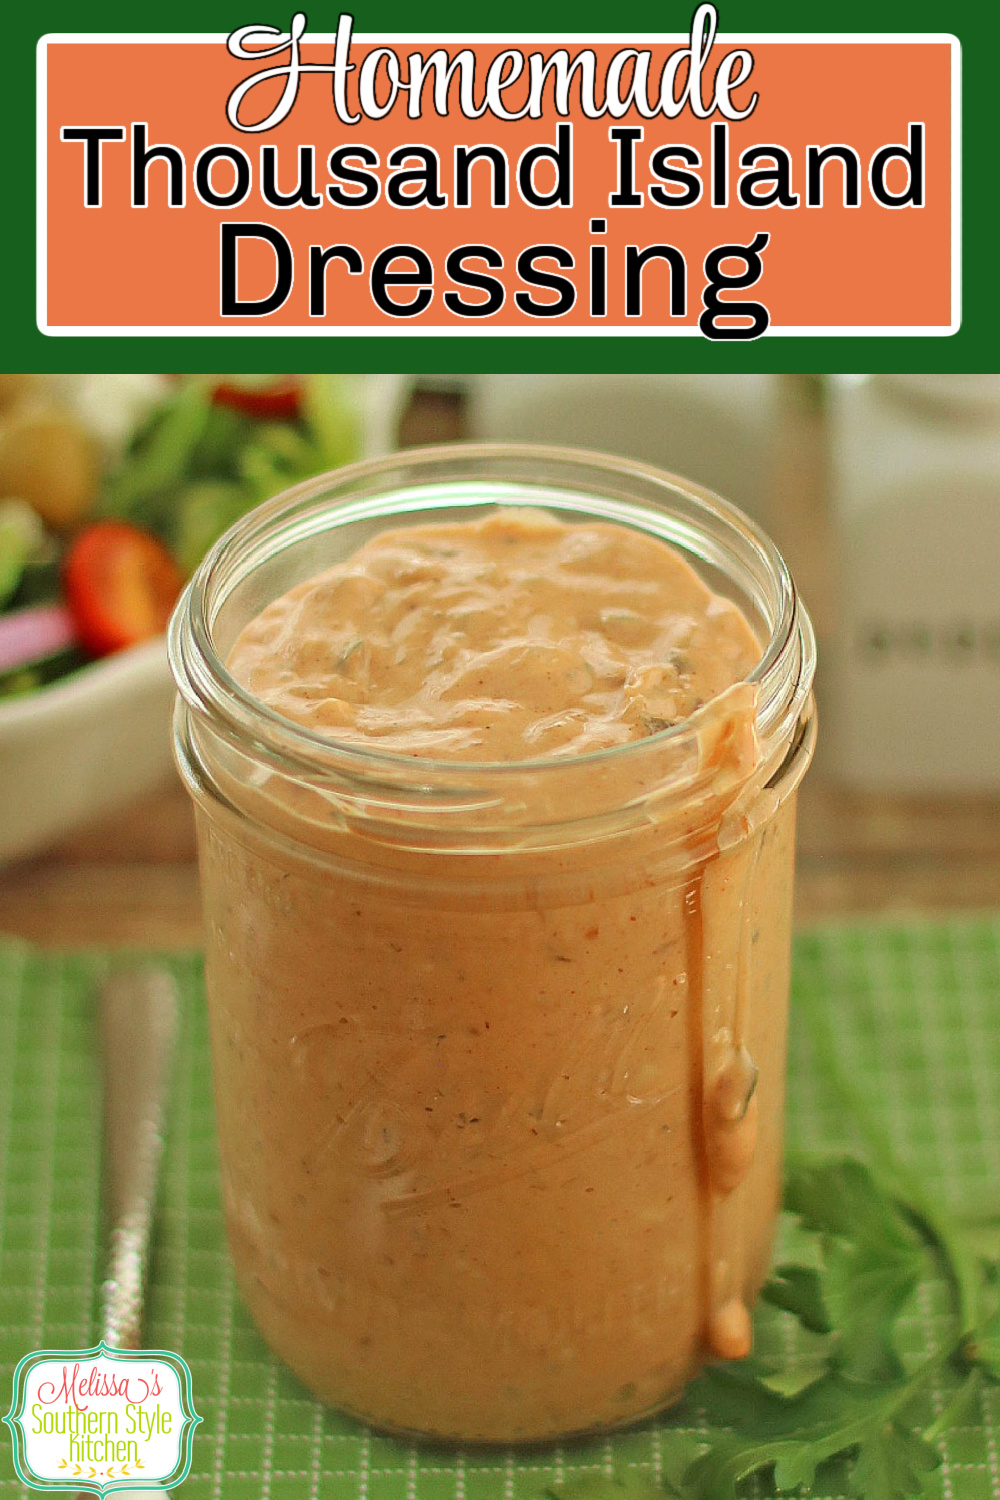 Use this easy Thousand Island Dressing as a salad dressing, sandwich spread or as a dip with your favorite fresh vegetables for snacking. #thousandislanddressing #easysaladrecipes #homemadethousandisland #easyrecipes #southernrecipes #dressingrecipes #dressing #diprecipes via @melissasssk